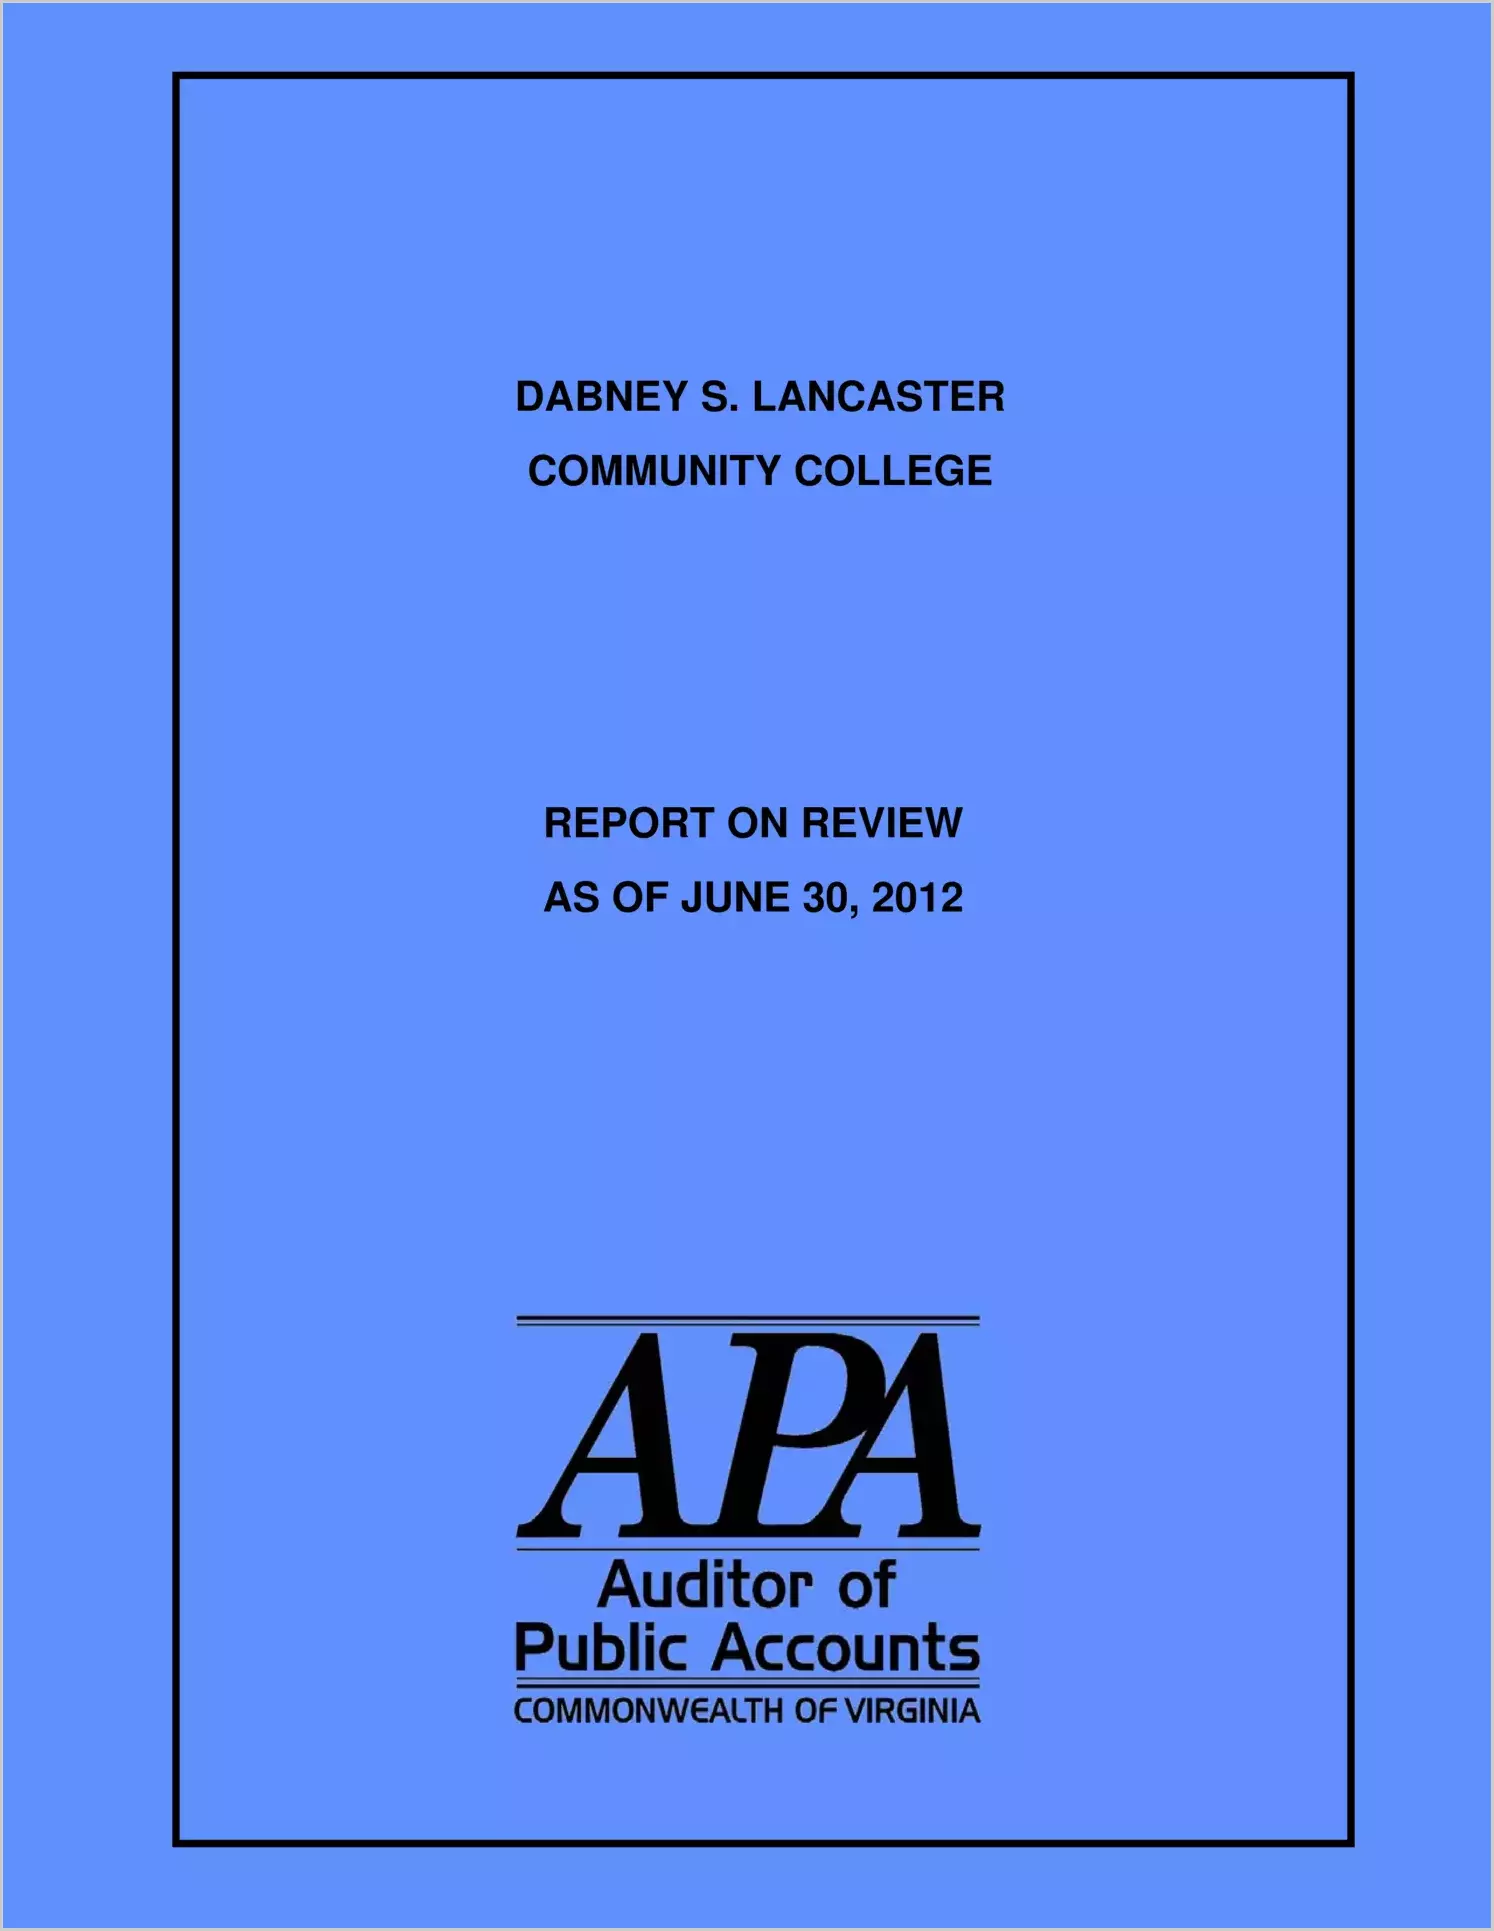 Dabney S. Lancaster Community College Reaccreditation Review for the year ended June 30, 2012